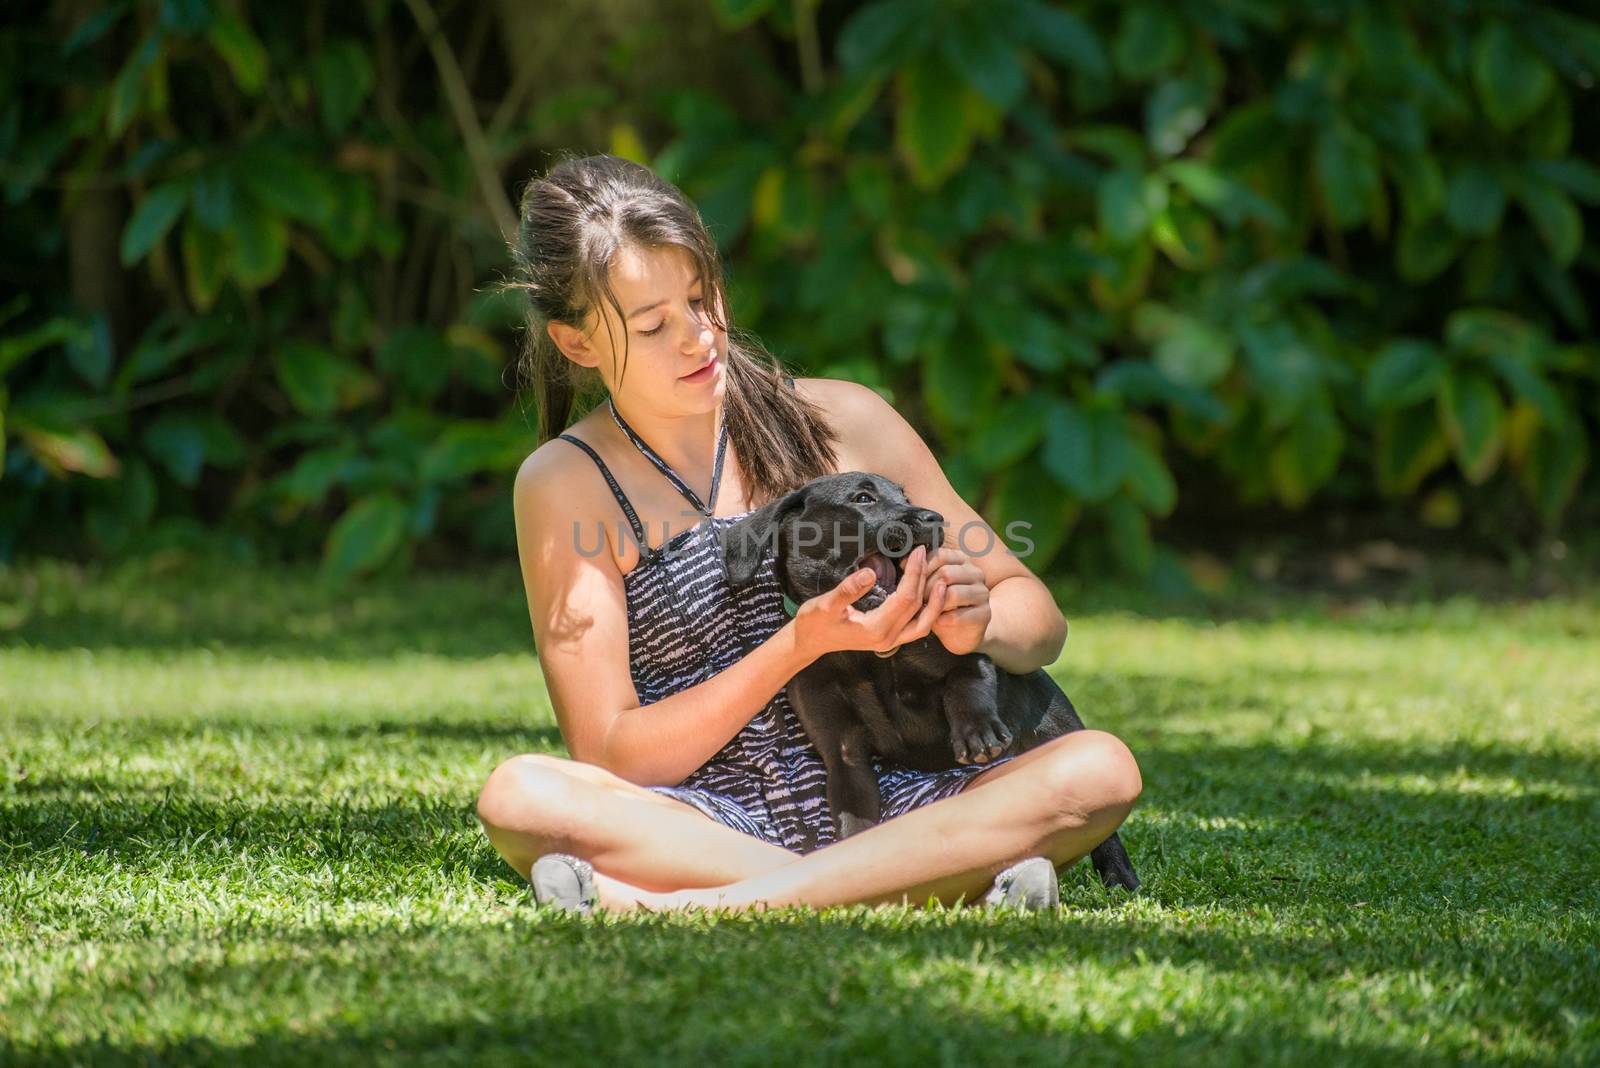 A teenage girl plays with her Labrador puppy outside on the lawn of their garden.